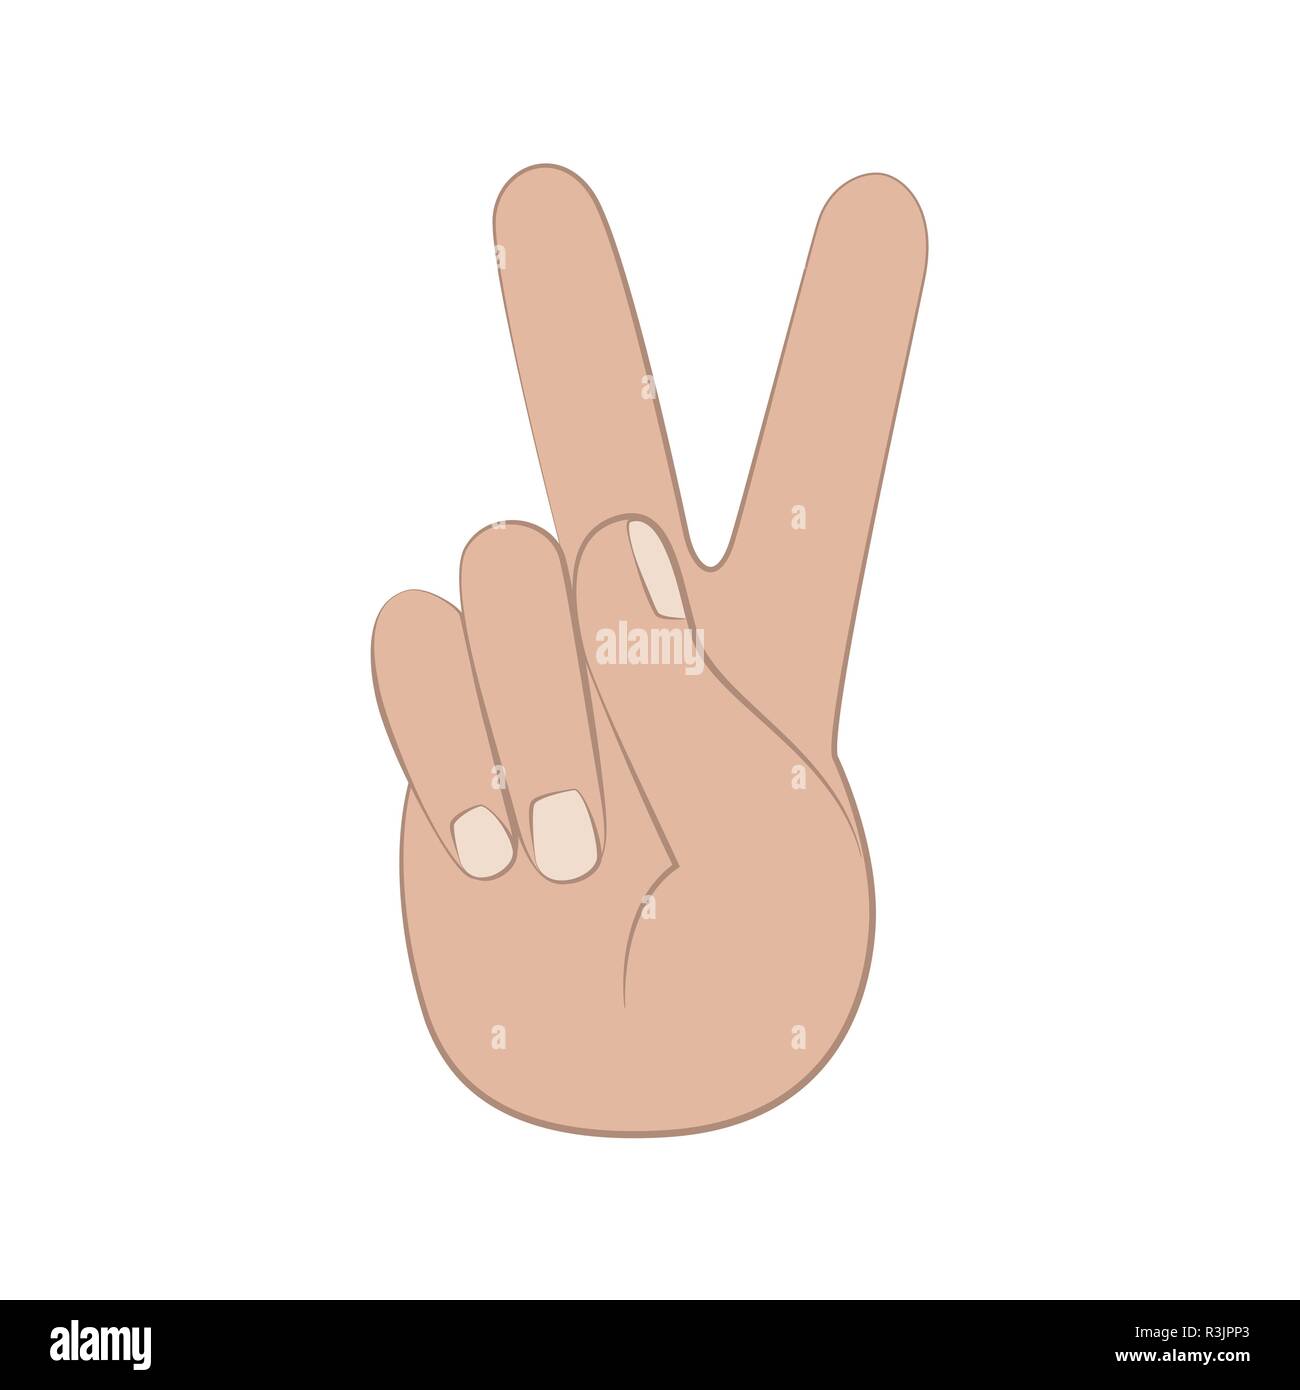 peace victory symbol hand isolated on white background vector illustration EPS10 Stock Vector